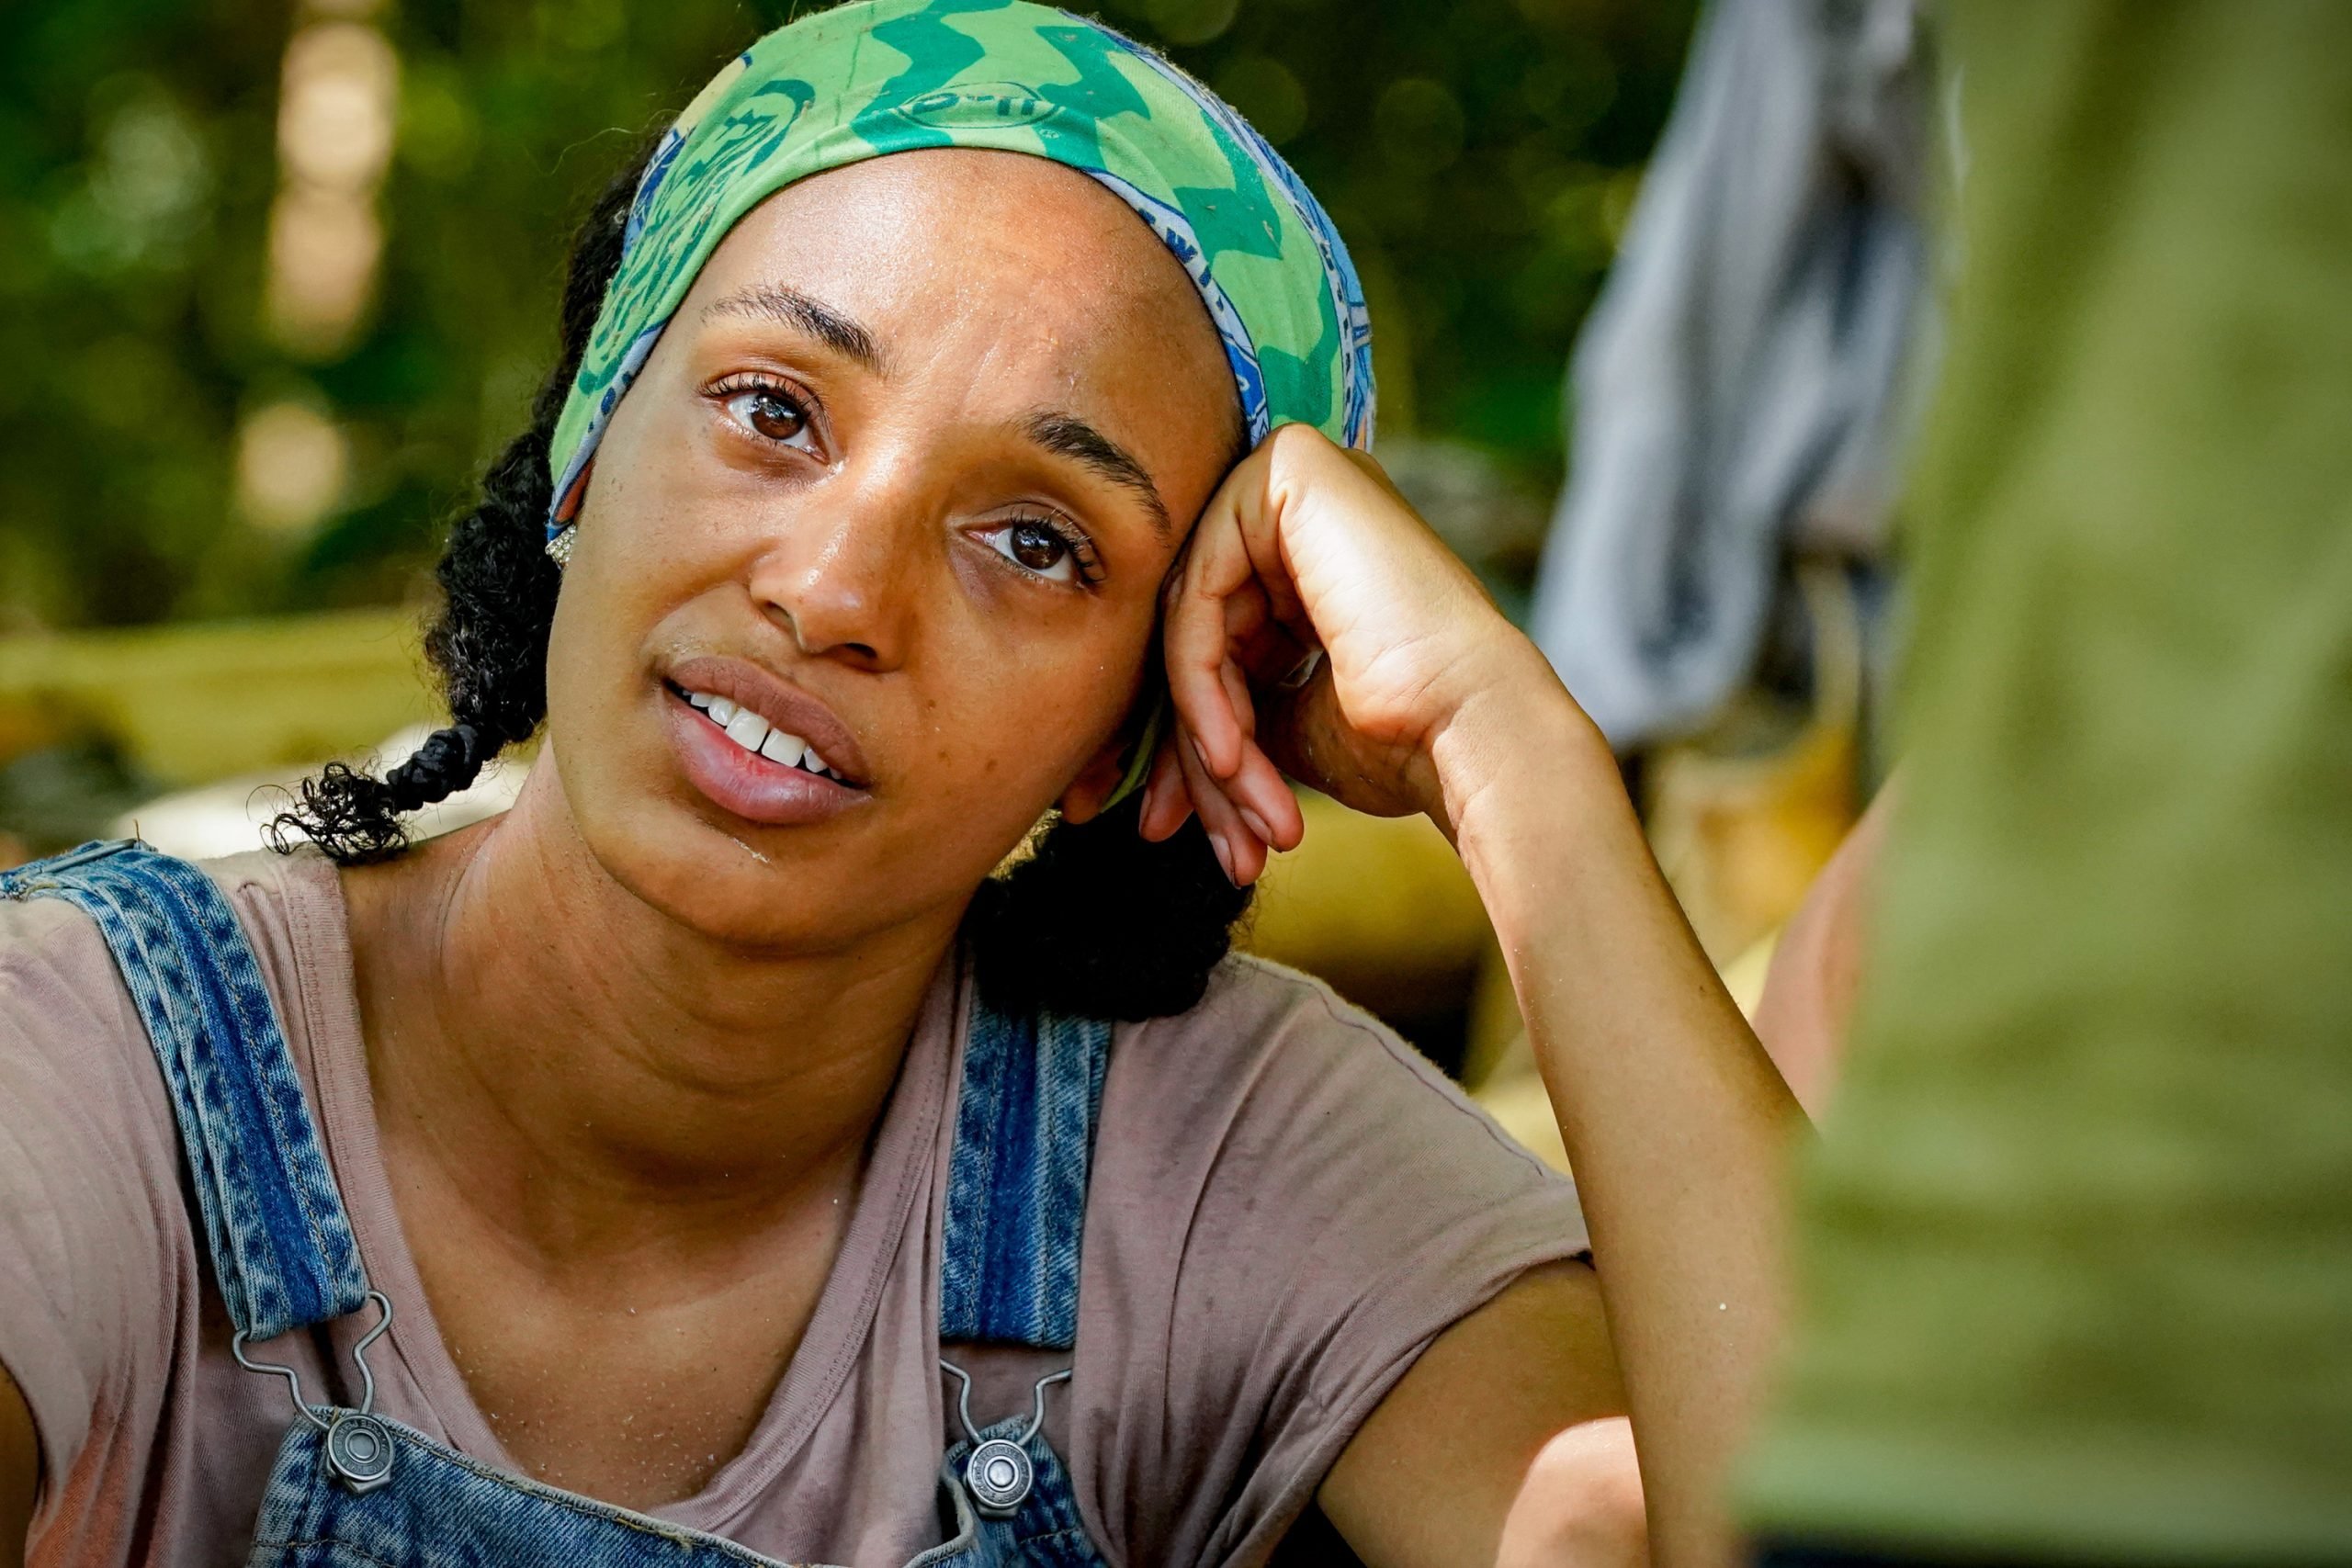 Shantel Smith on 'Survivor 41' wears a shirt and overalls as she sits down on the ground.